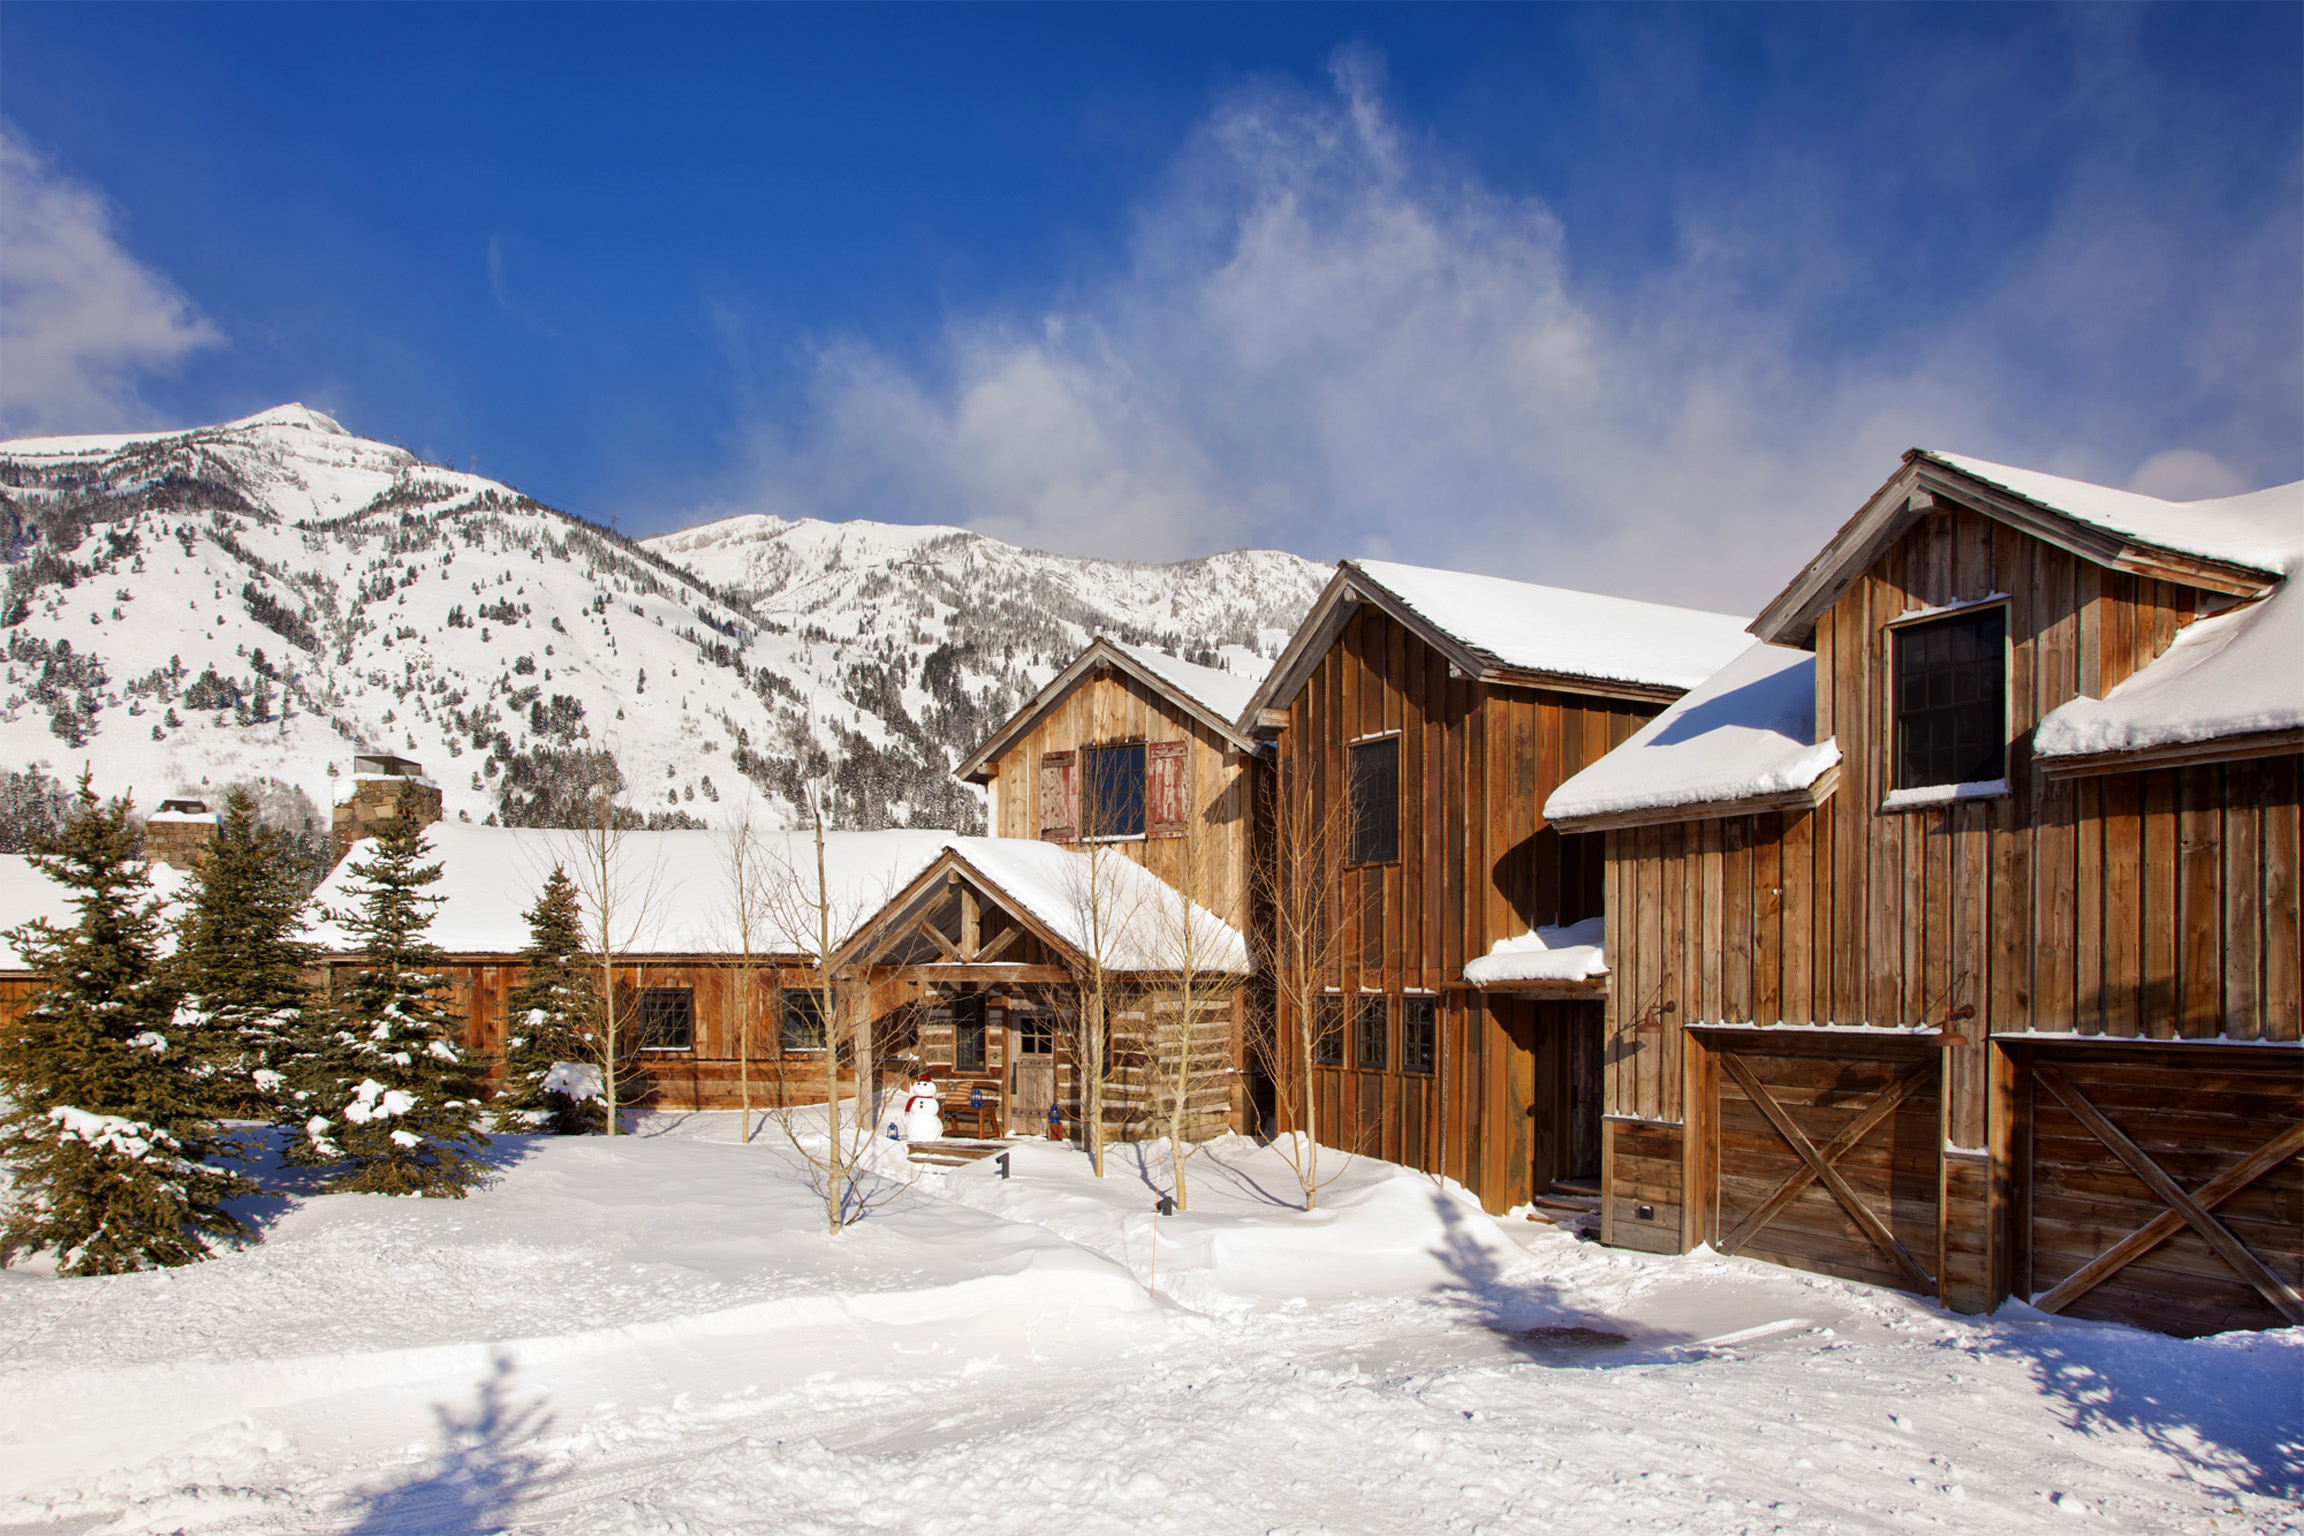 PHOTO: The Shooting Star cabin in Wilson, Wyoming is $1,100 per night for 14 guests.